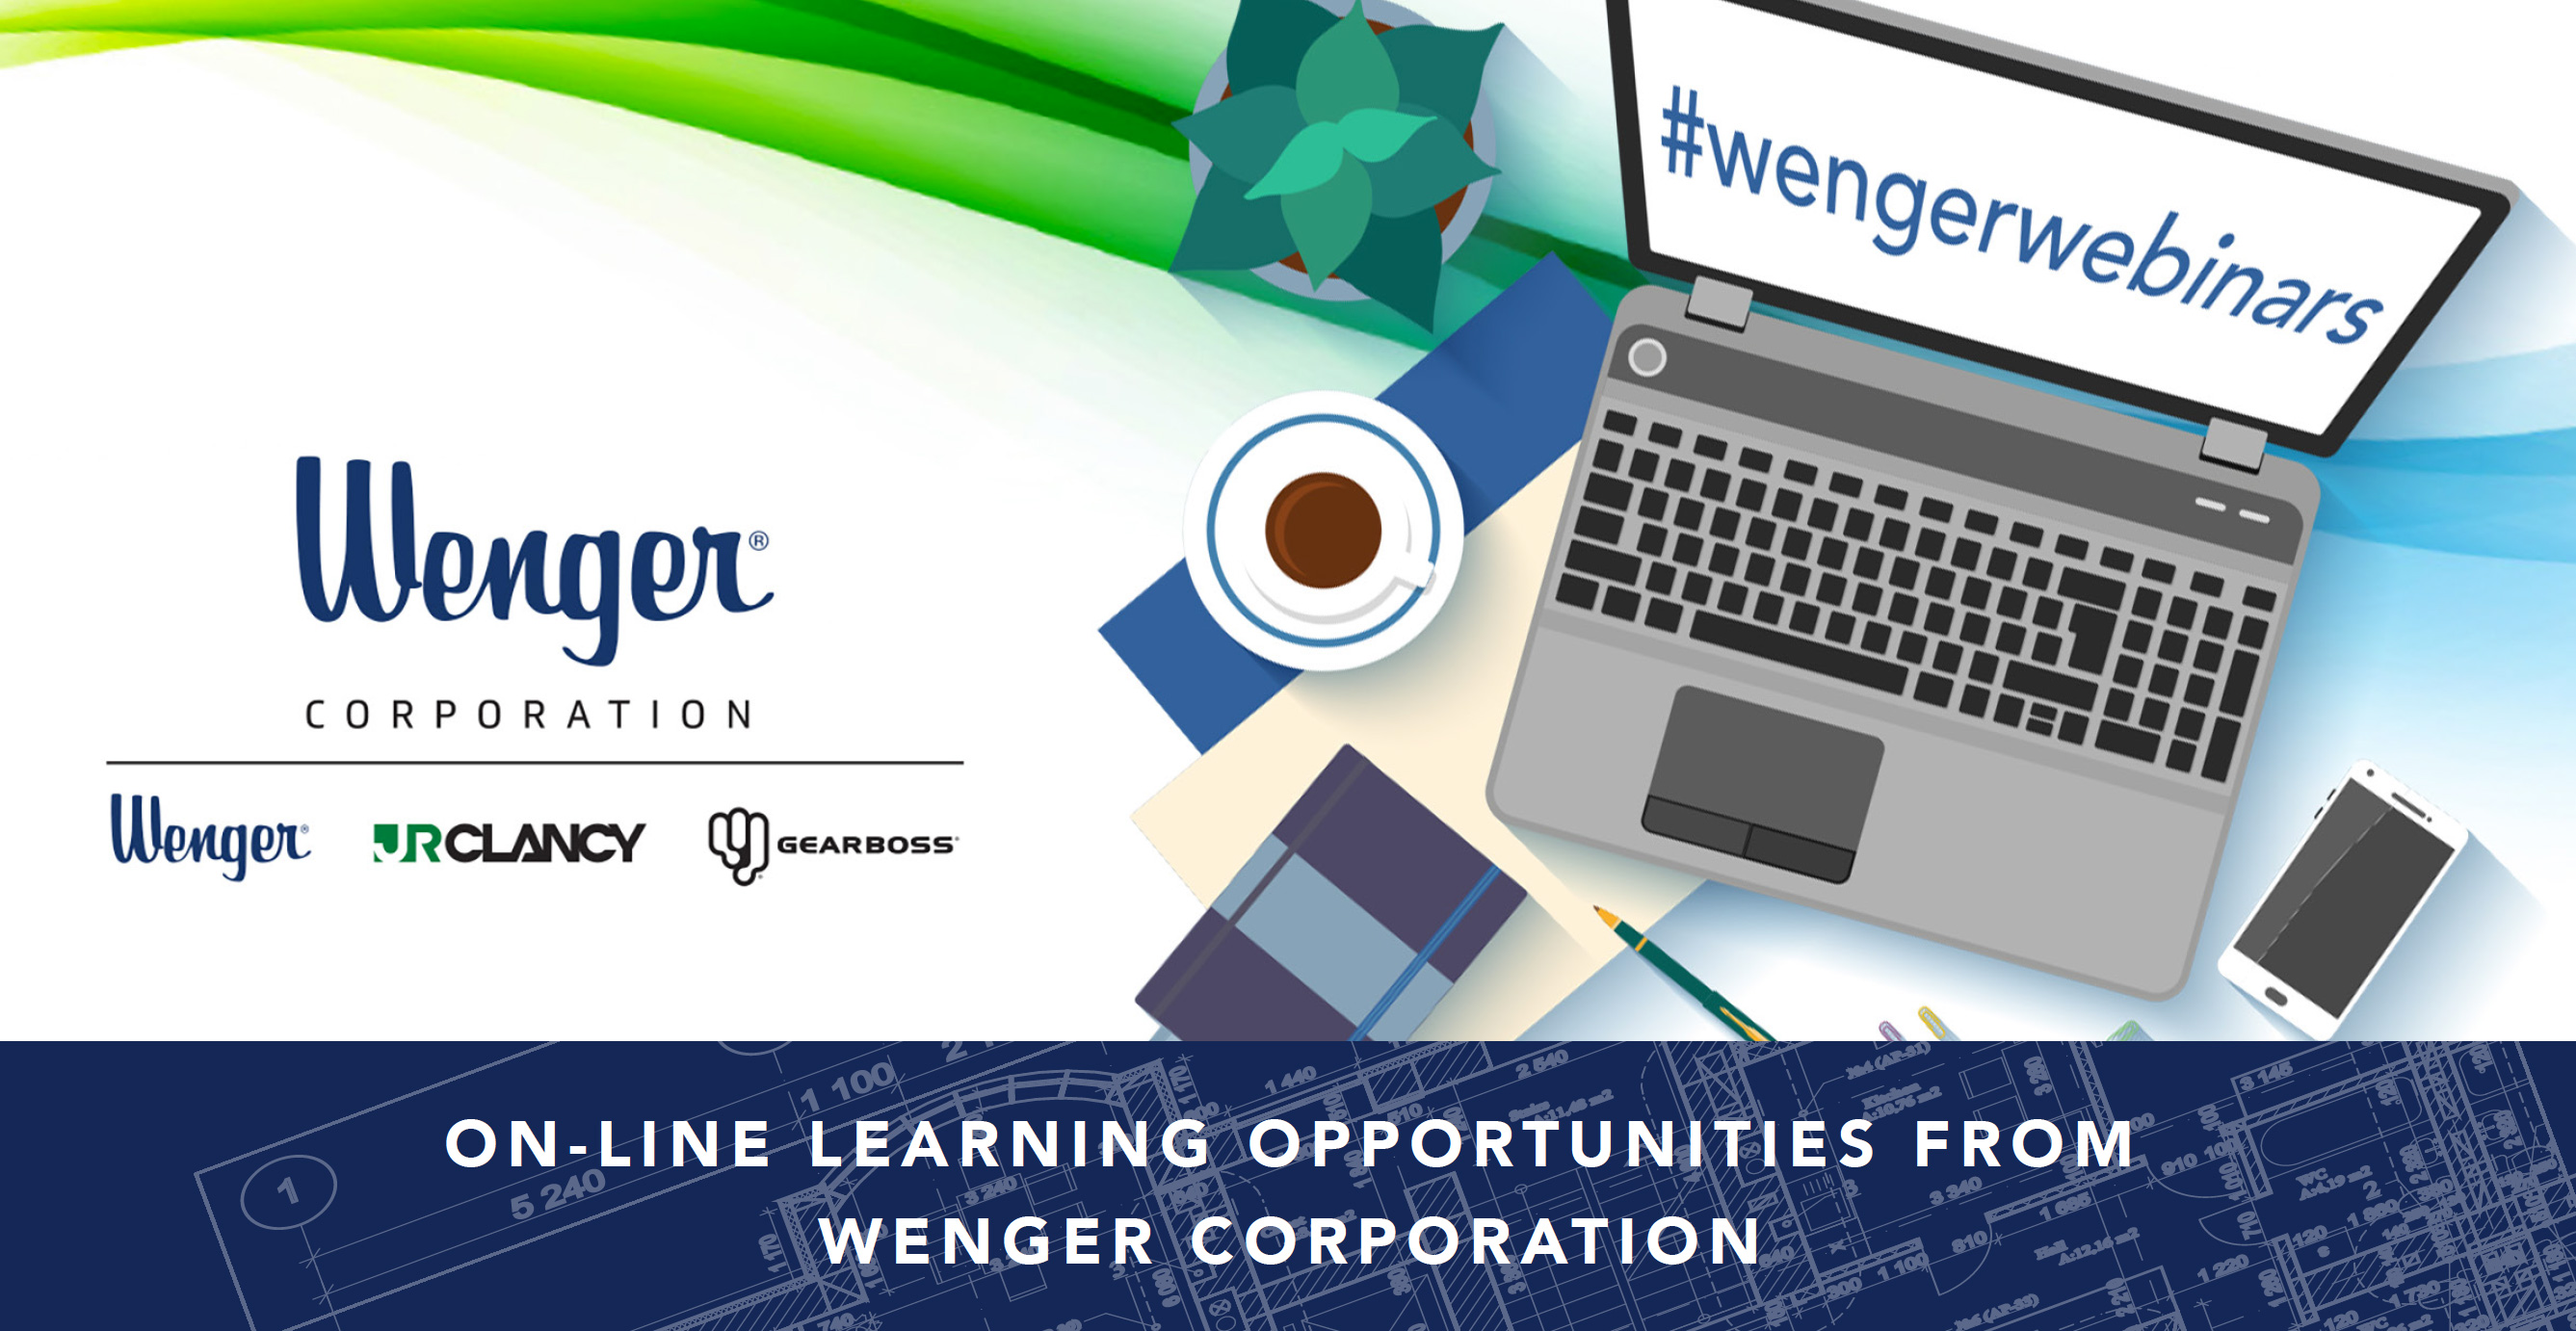 ON-LINE LEARNING OPPORTUNITIES FROM WENGER CORPORATION